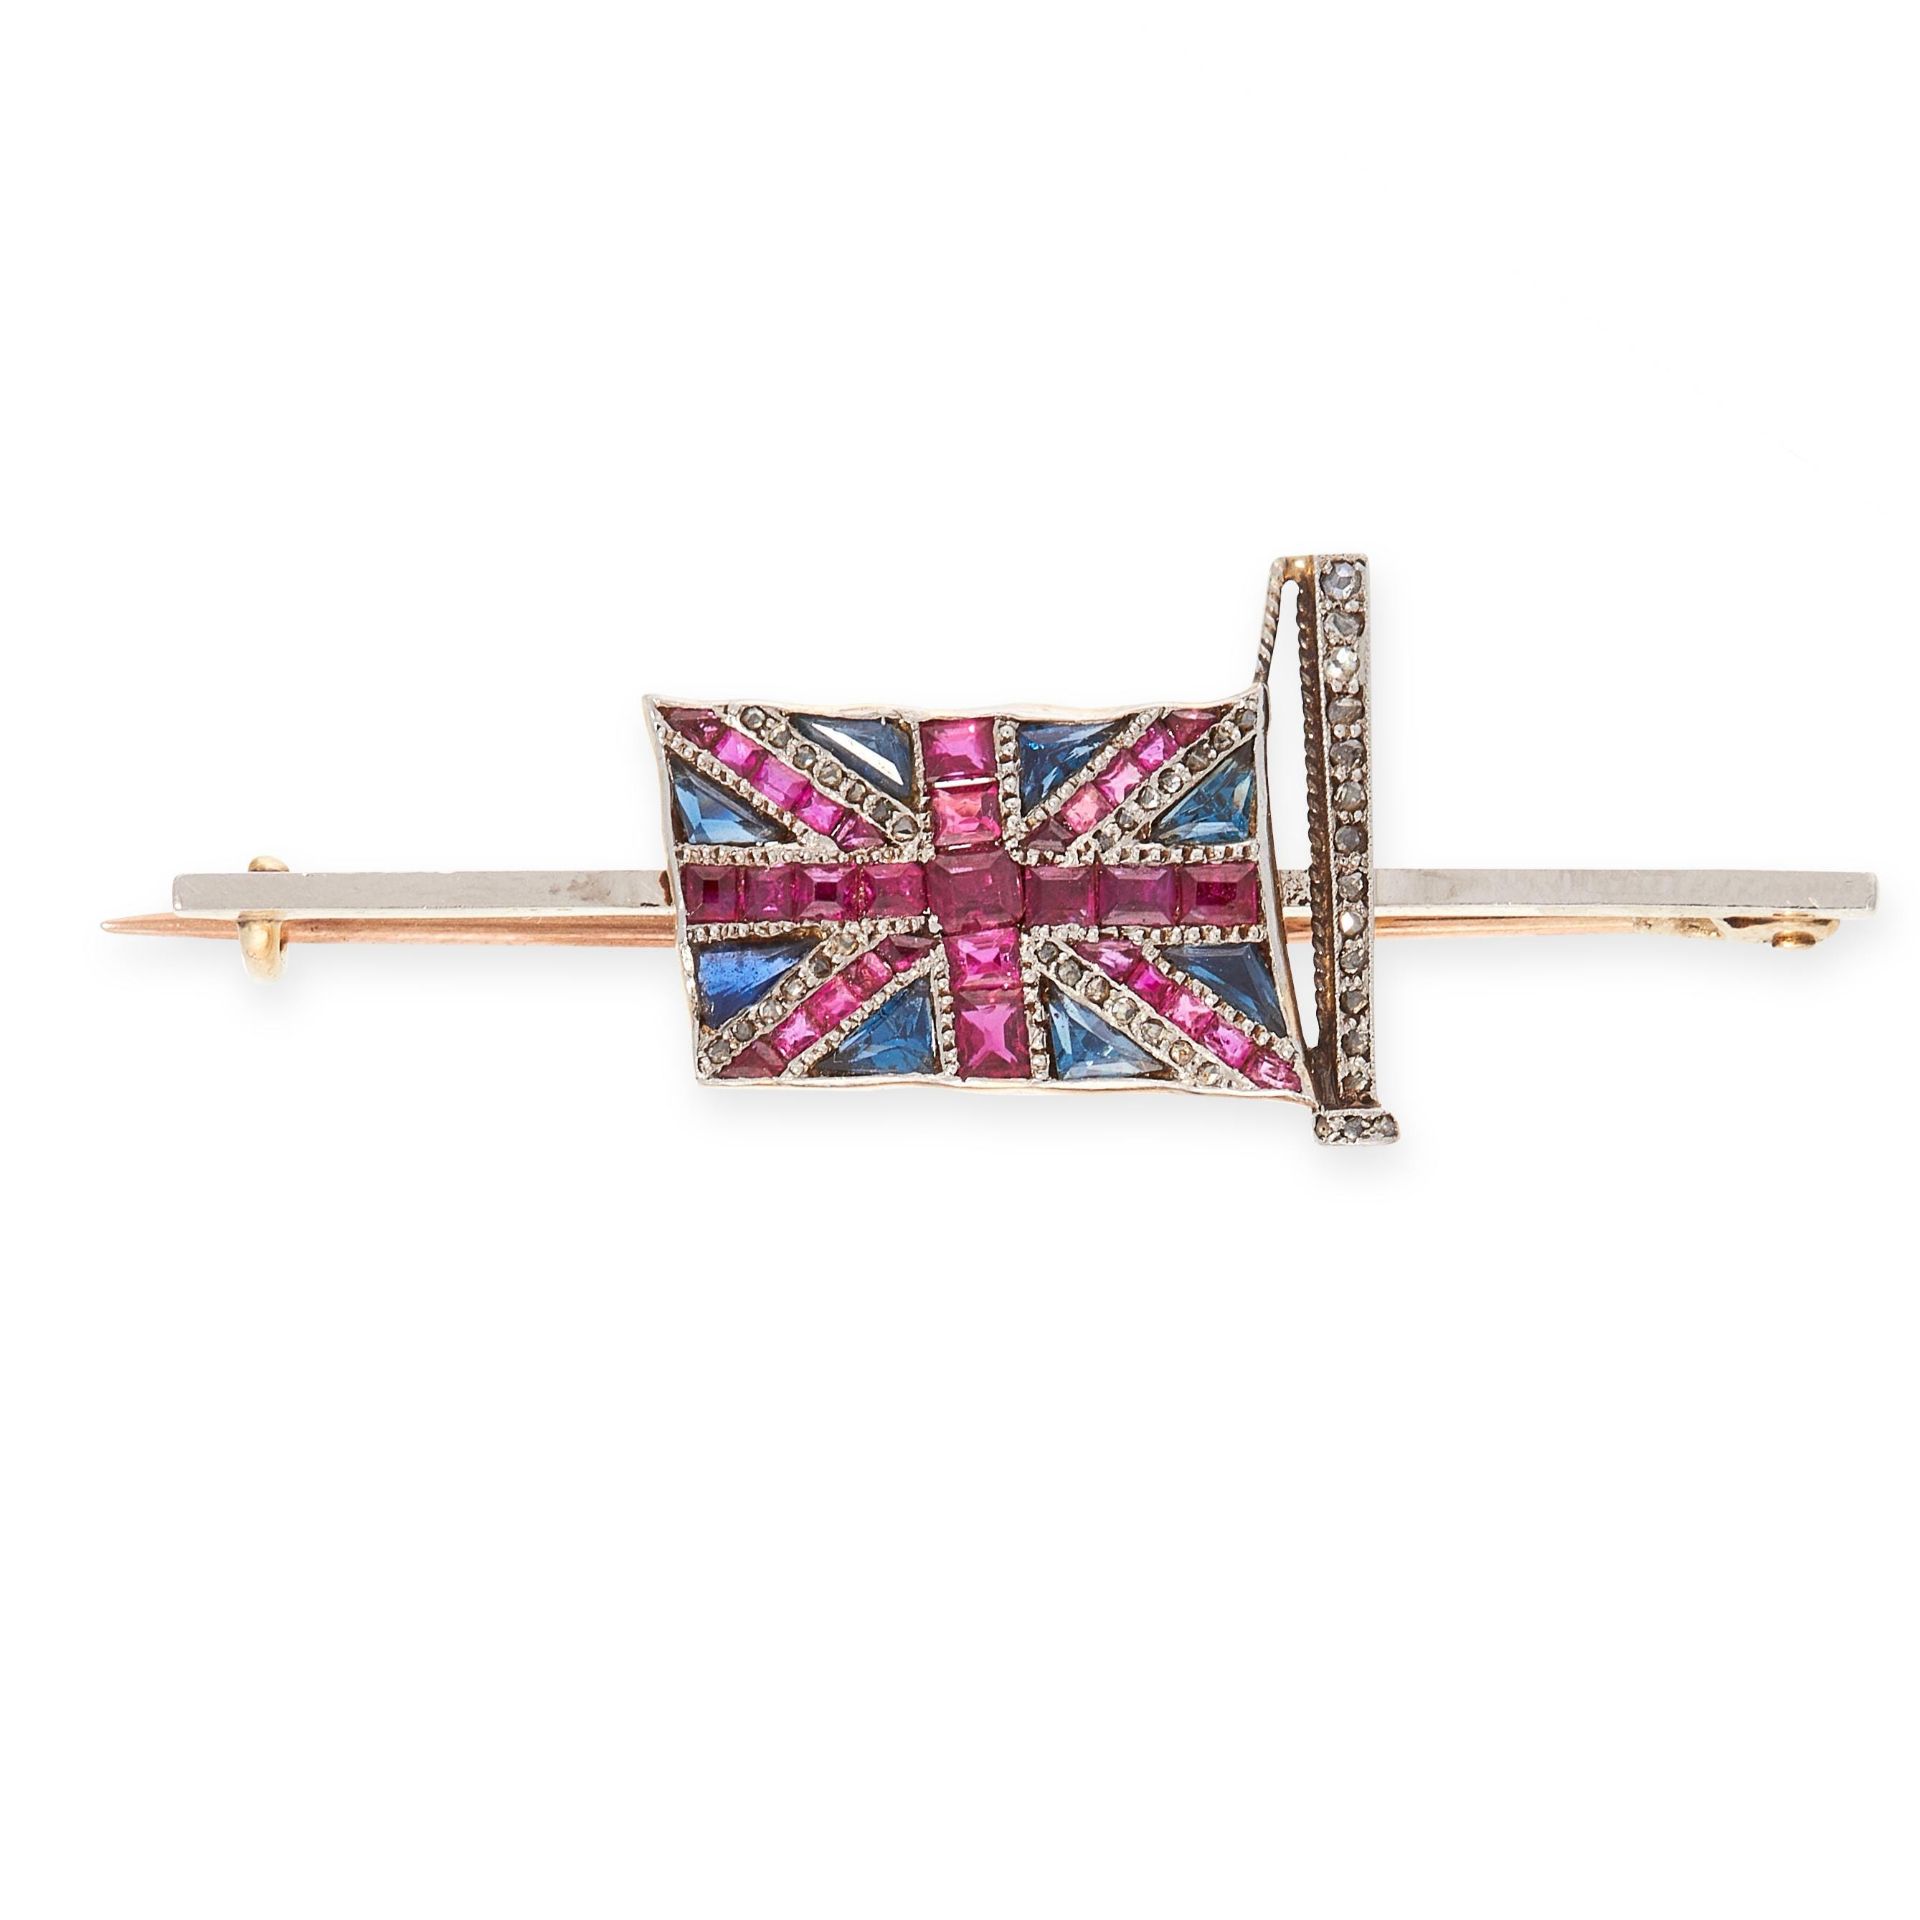 RUBY, SAPPHIRE AND DIAMOND UNION JACK FLAG BROOCH, EARLY 20TH CENTURY in yellow gold, set with